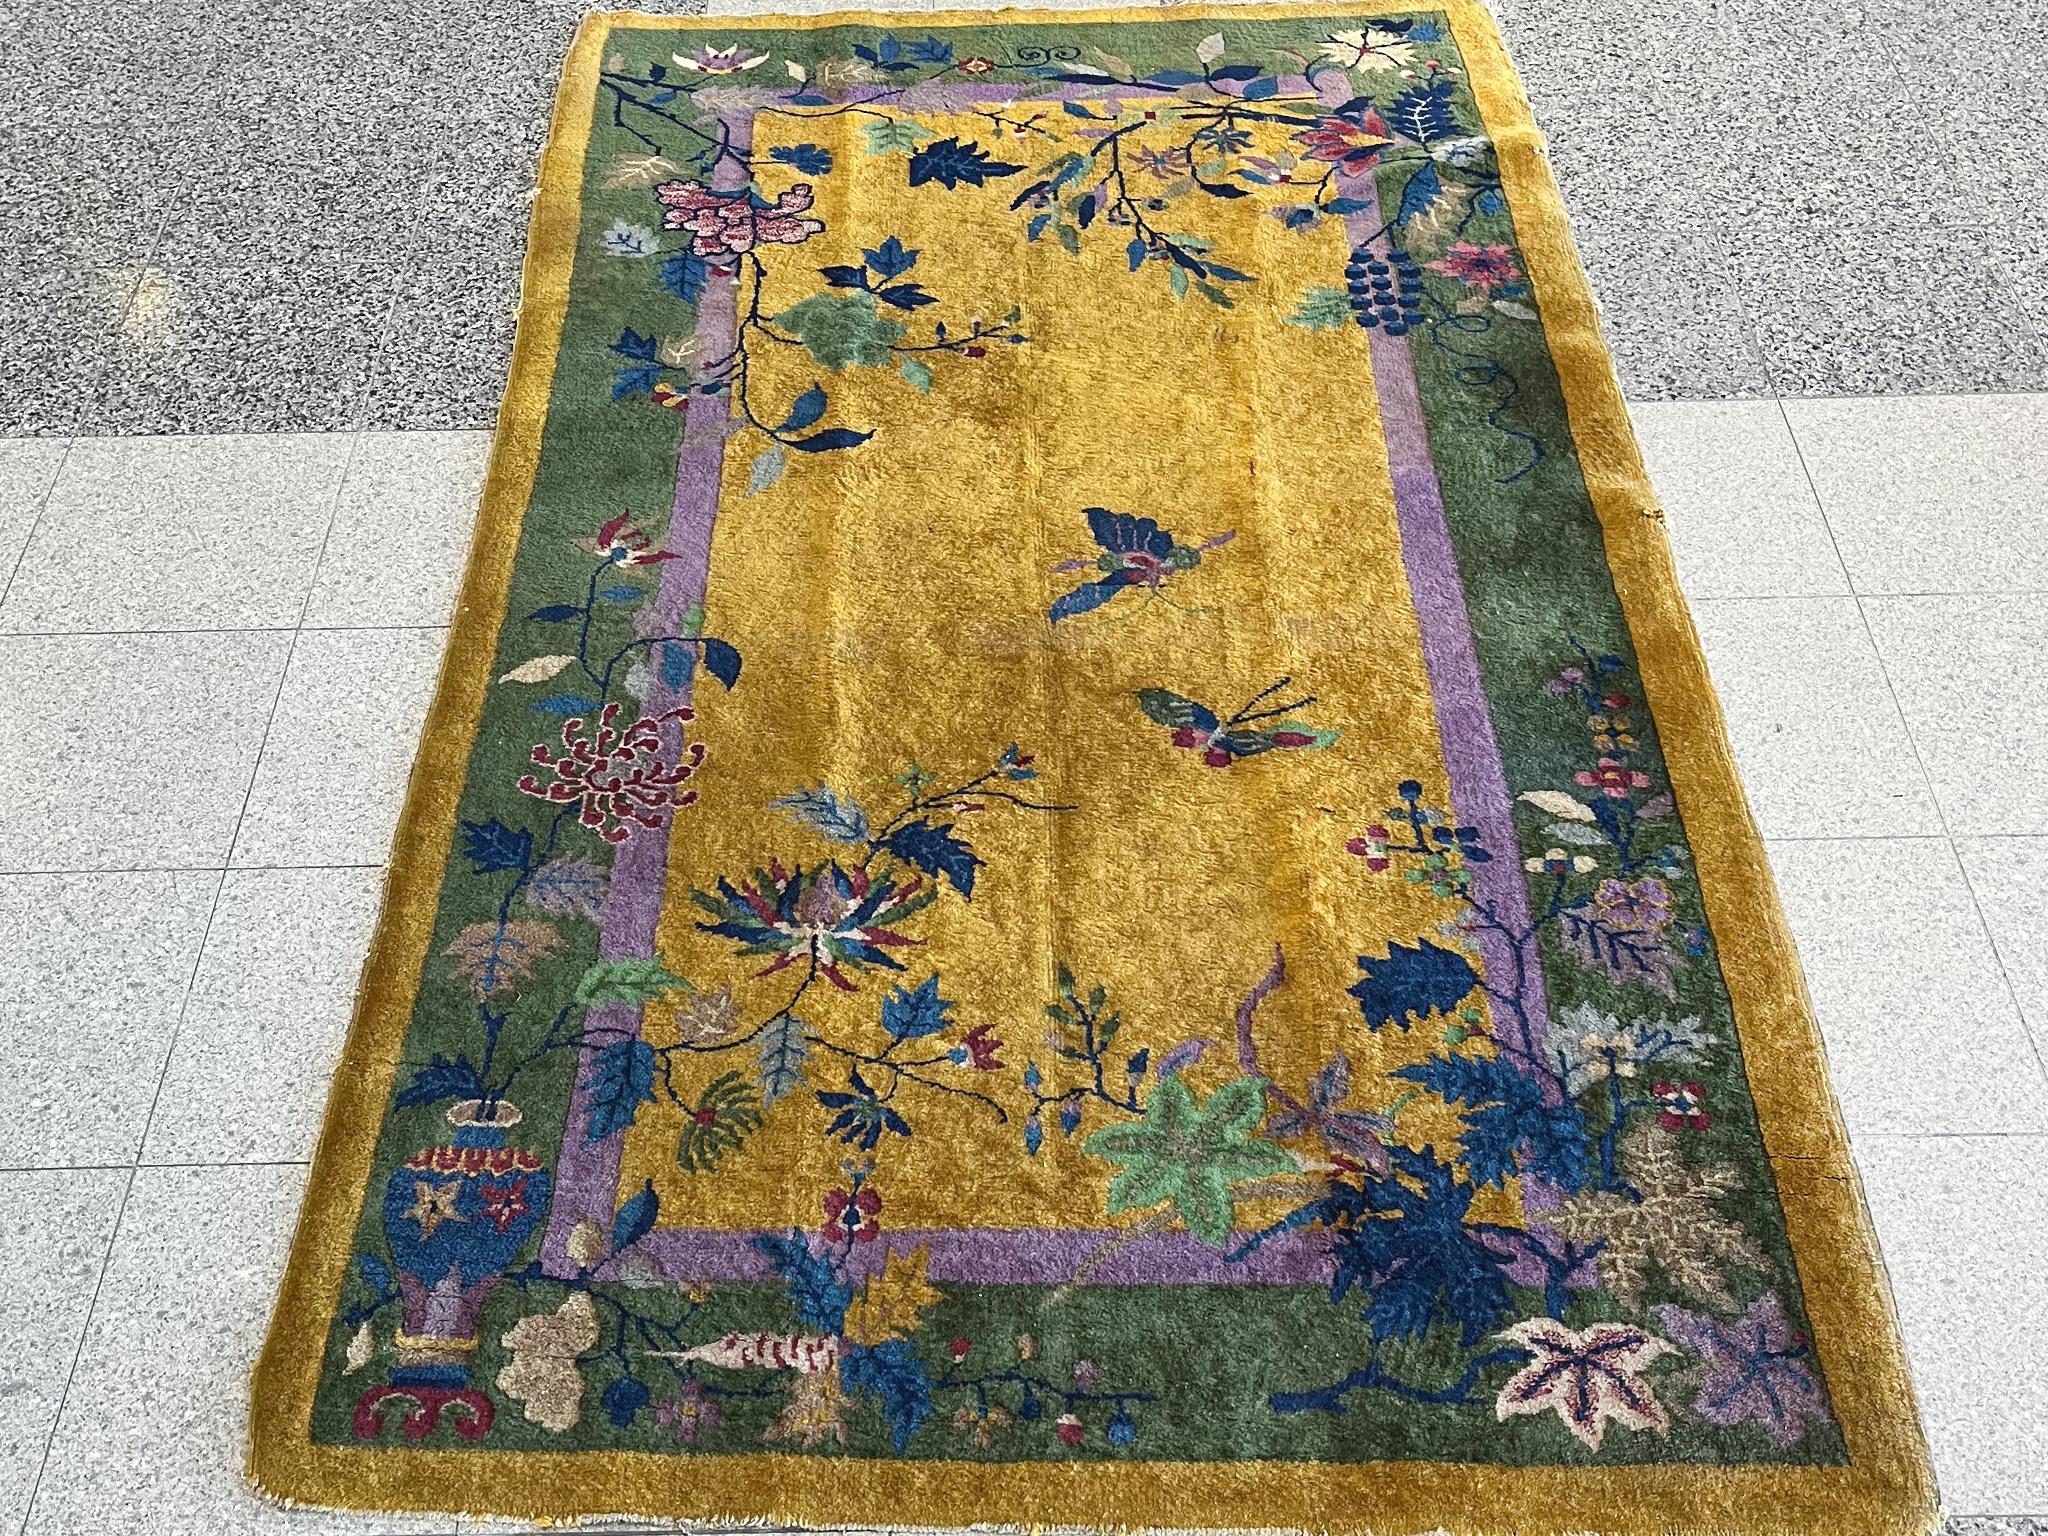 1930s handwoven Chinese Deco rug with a vibrant palette of greens, purples, and blues arranged in a design of florals and vines set against a bronze olive field.

Dimensions:
6'9